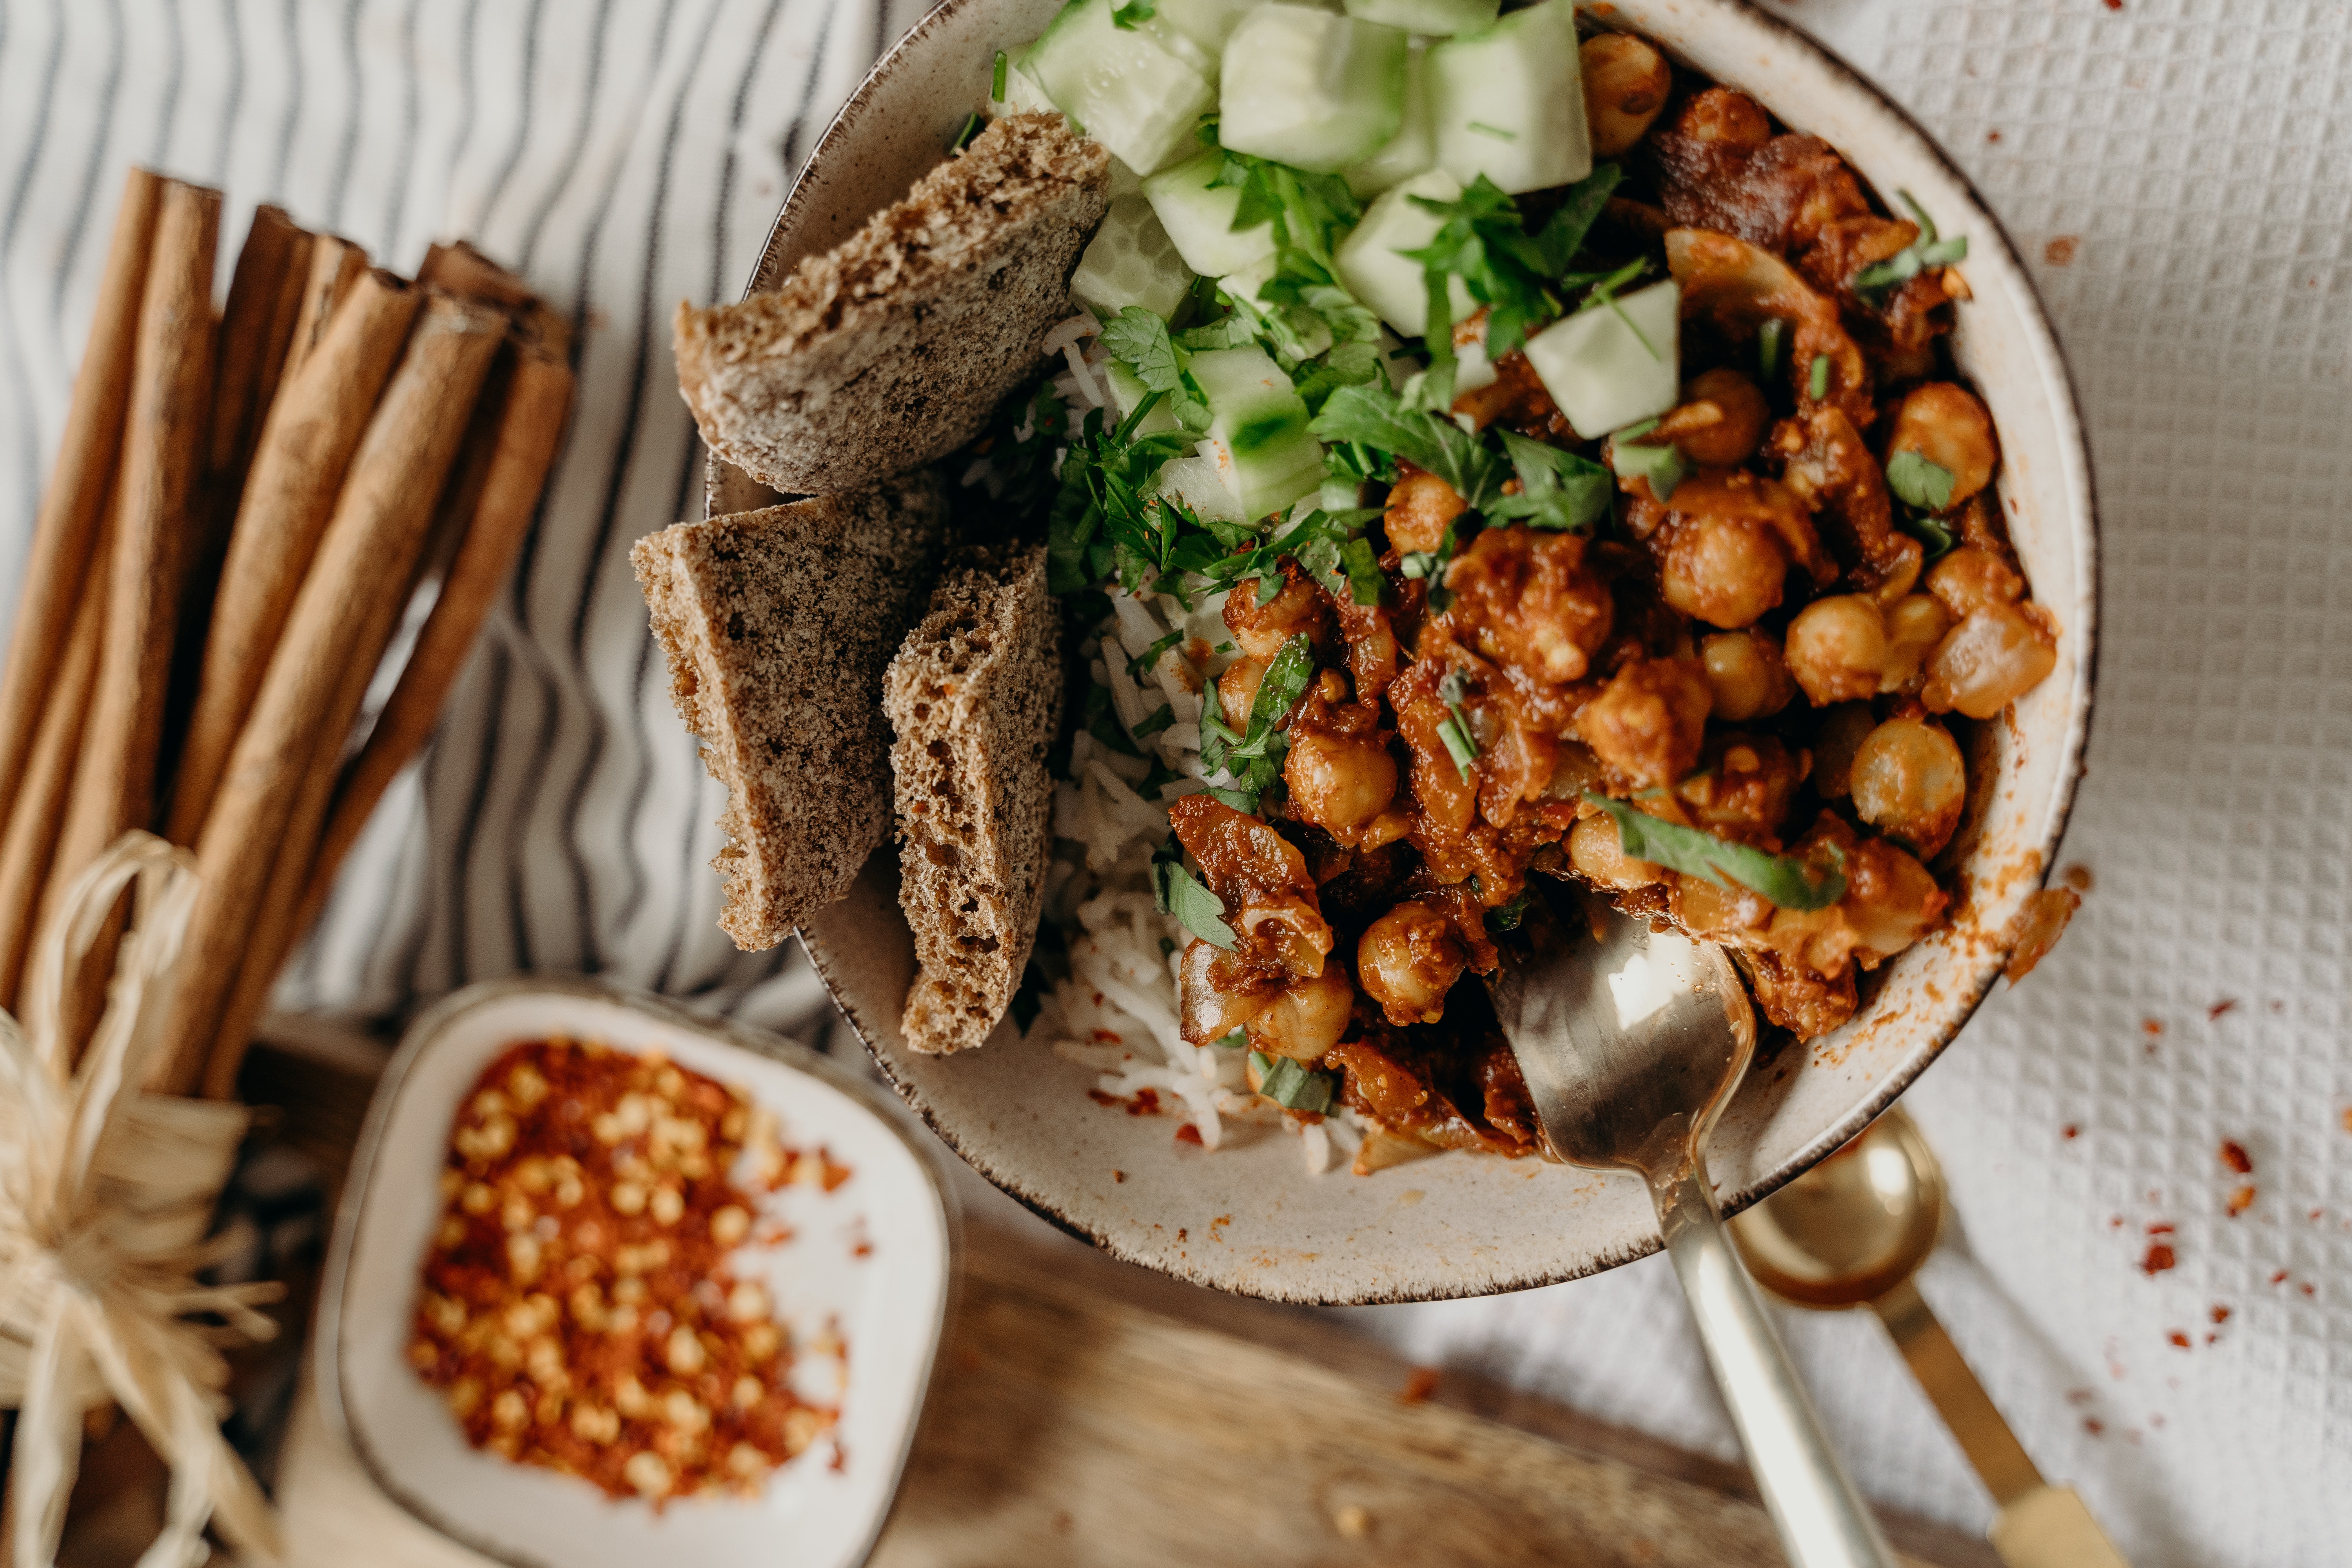 Bowl of chickpeas and rice